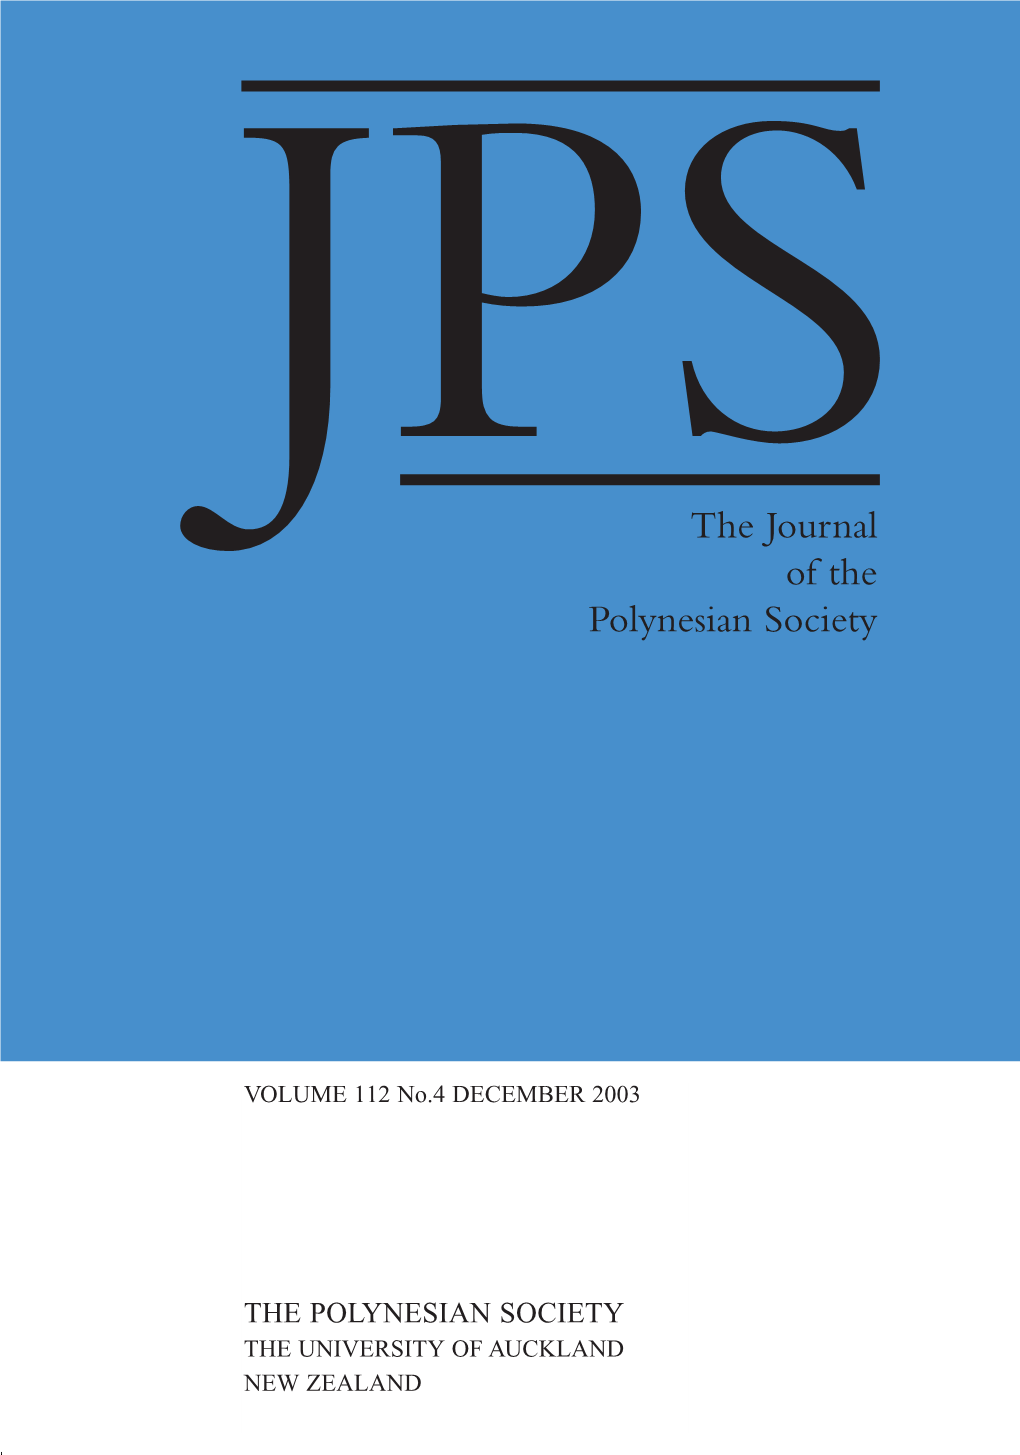 THE JOURNAL of the POLYNESIAN SOCIETY VOLUME 112 No.4 DECEMBER 2003 Coverdec03.Qxd 22/01/2004 7:39 A.M